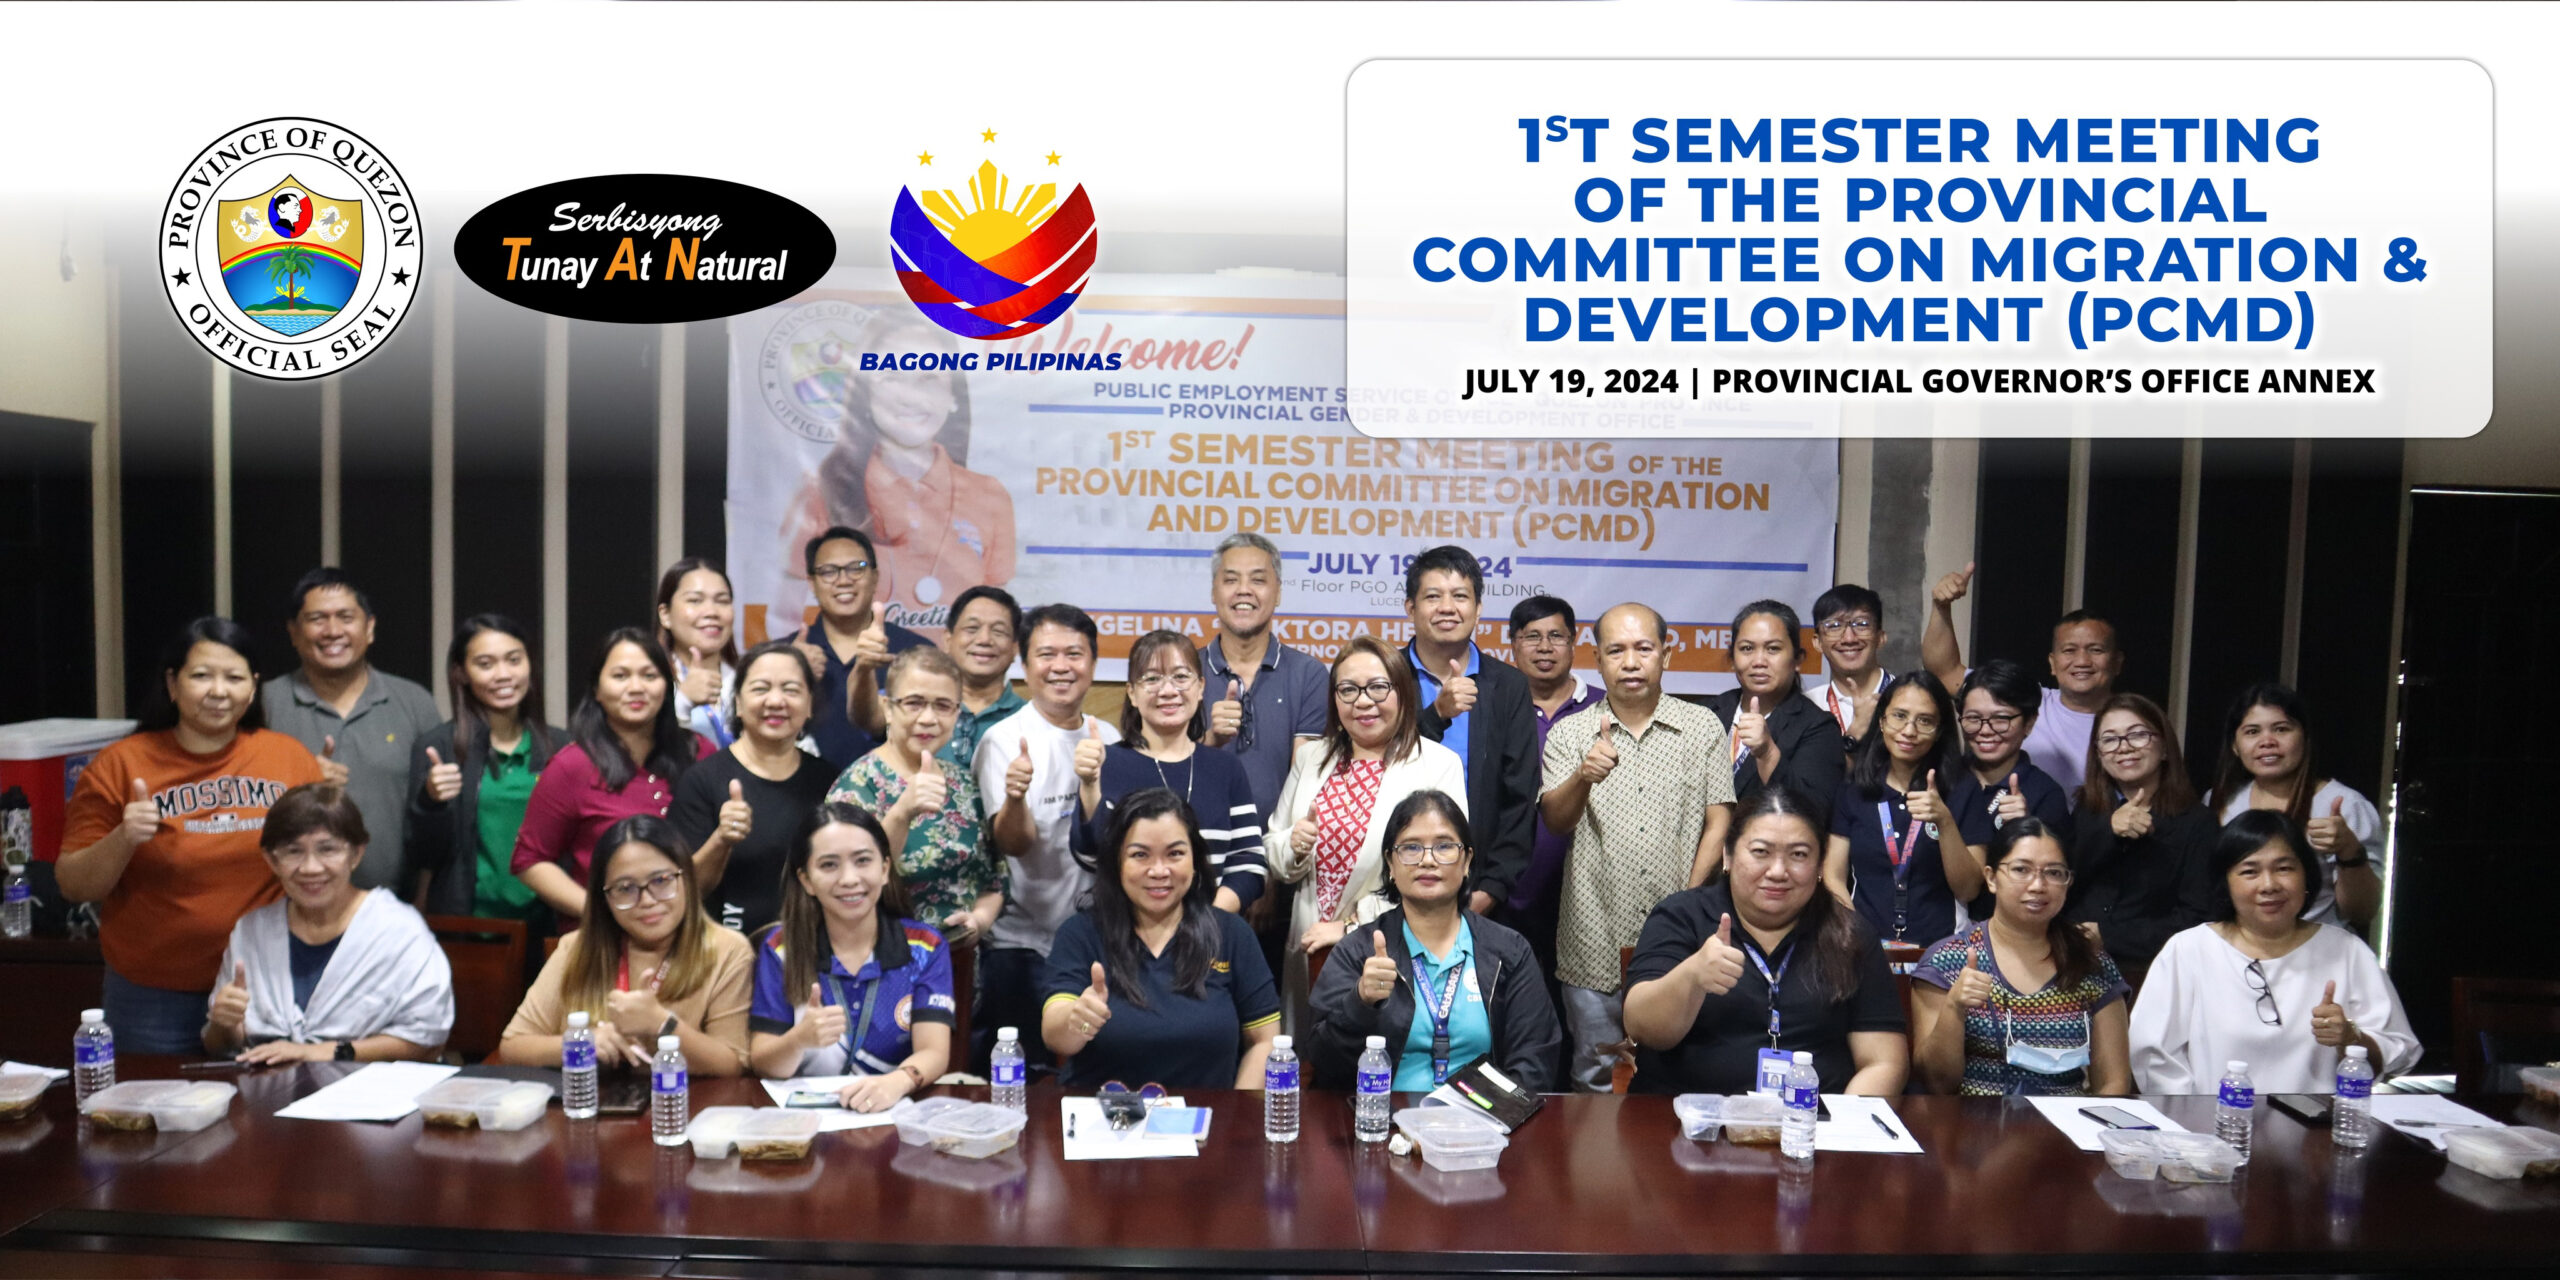 1st Semester Meeting of the Provincial Committee on Migration & Development (PCMD) | July 19, 2024